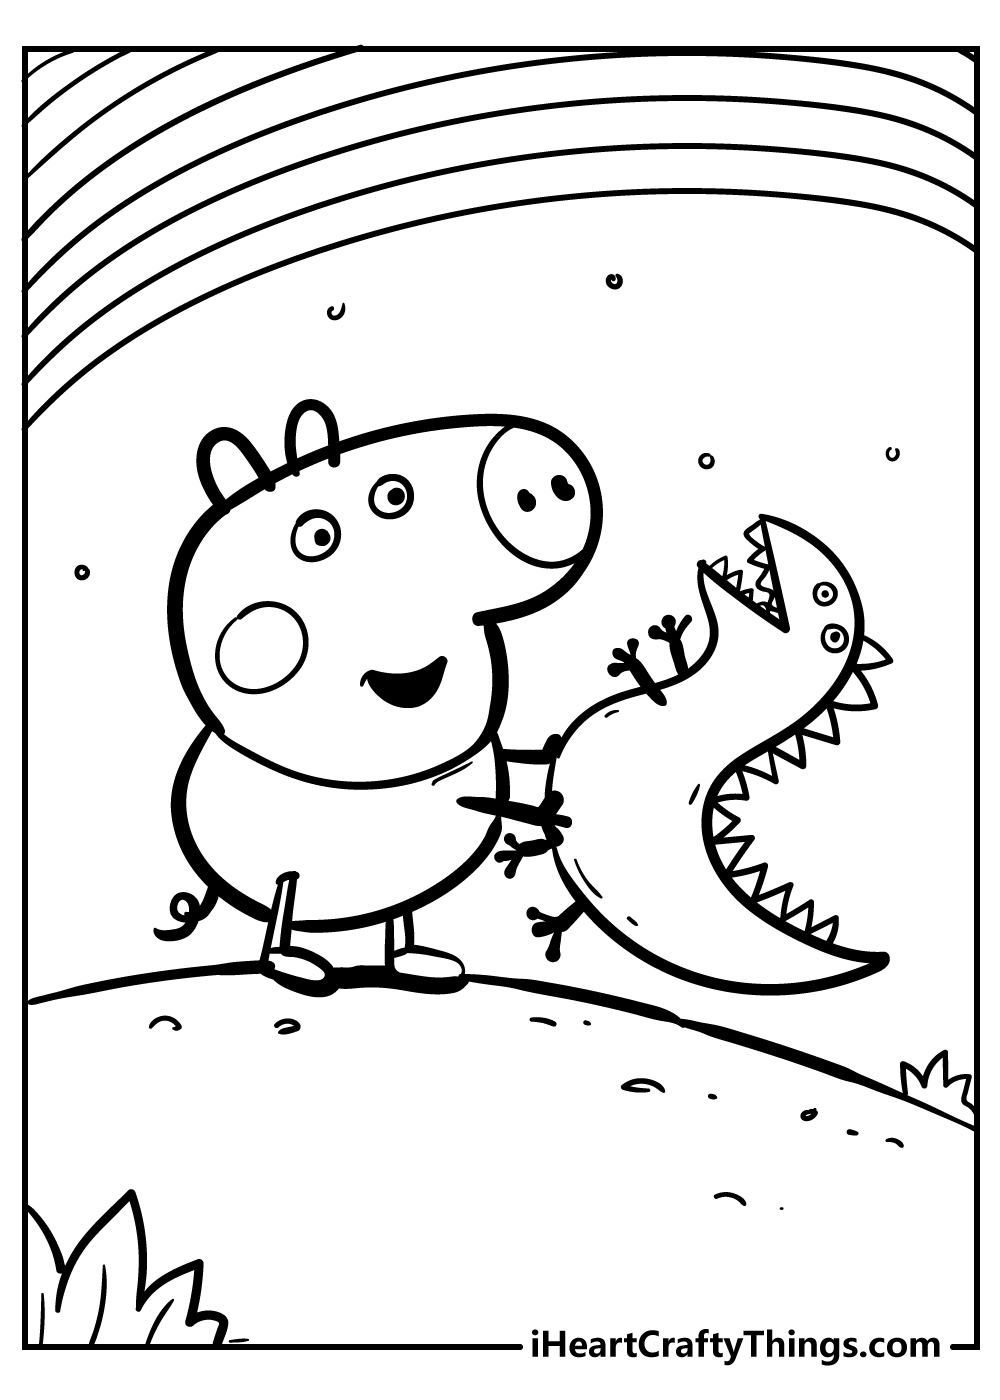 Peppa Pig coloring sheet for children free download